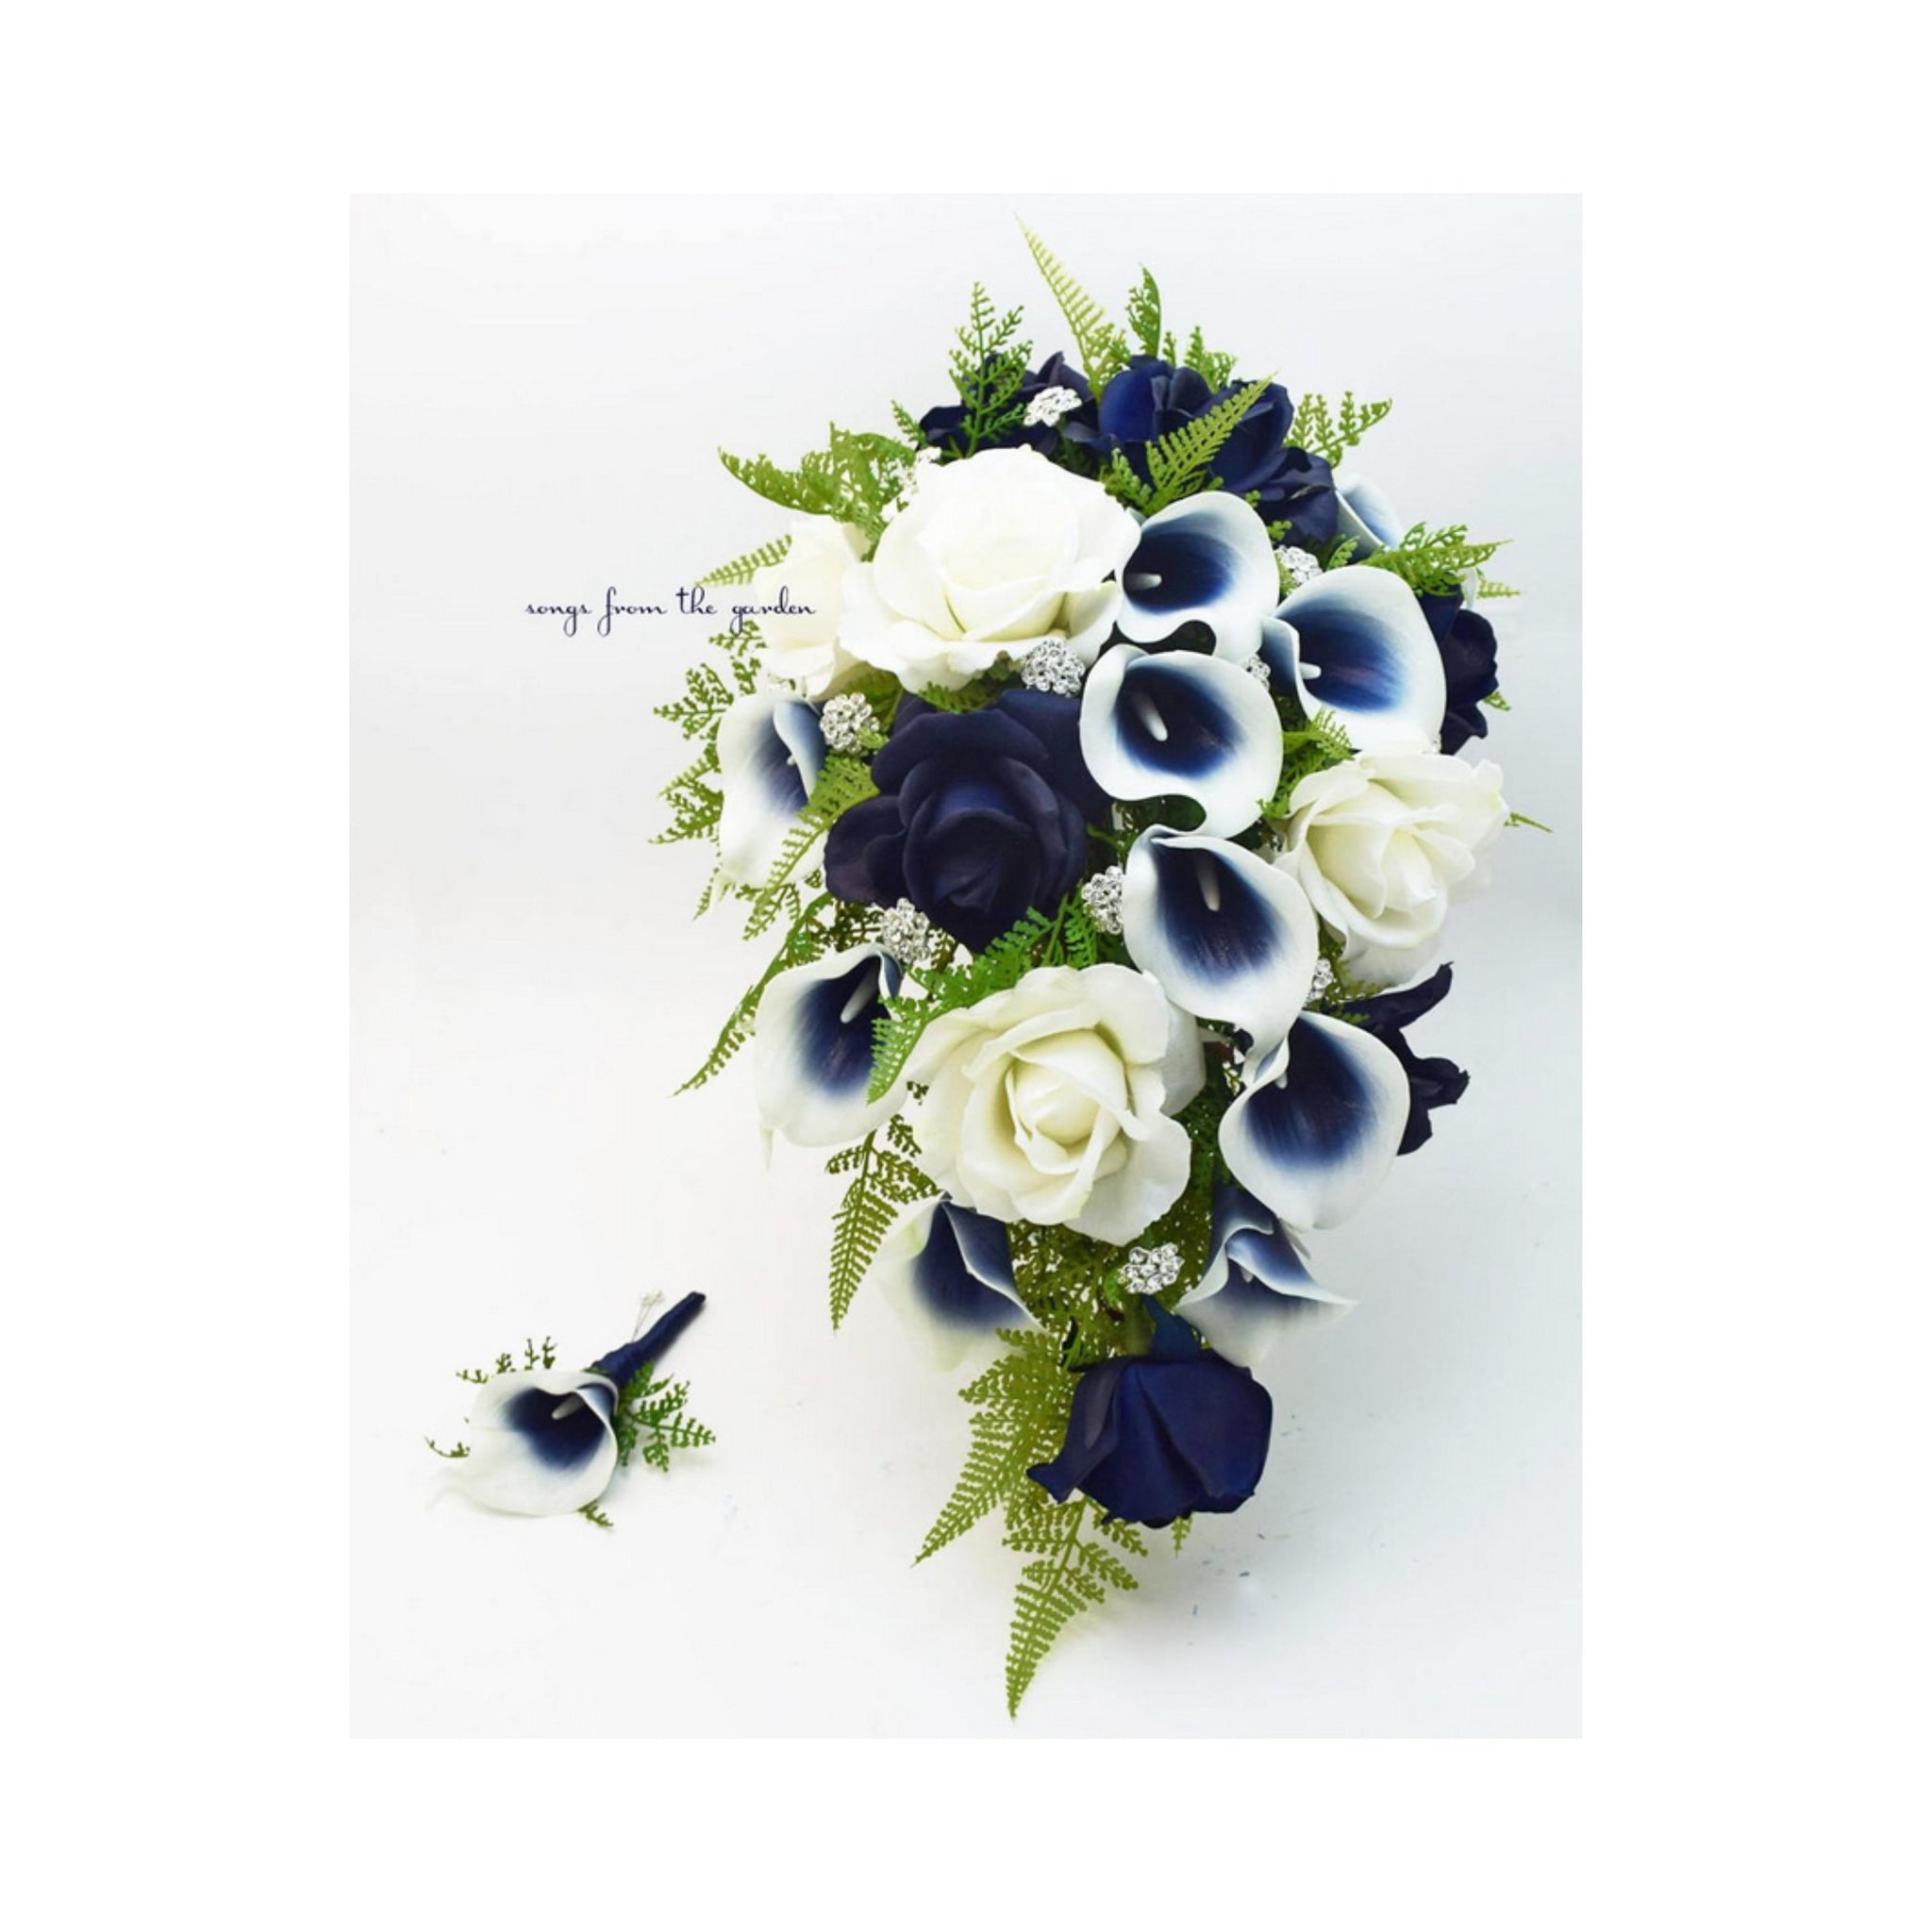 Navy Blue White Cascade Bridal Bouquet - Real Touch Callas Roses Rhinestones - Add Boutonniere Bridesmaid Bouquet Crown Cake Flowers & More!